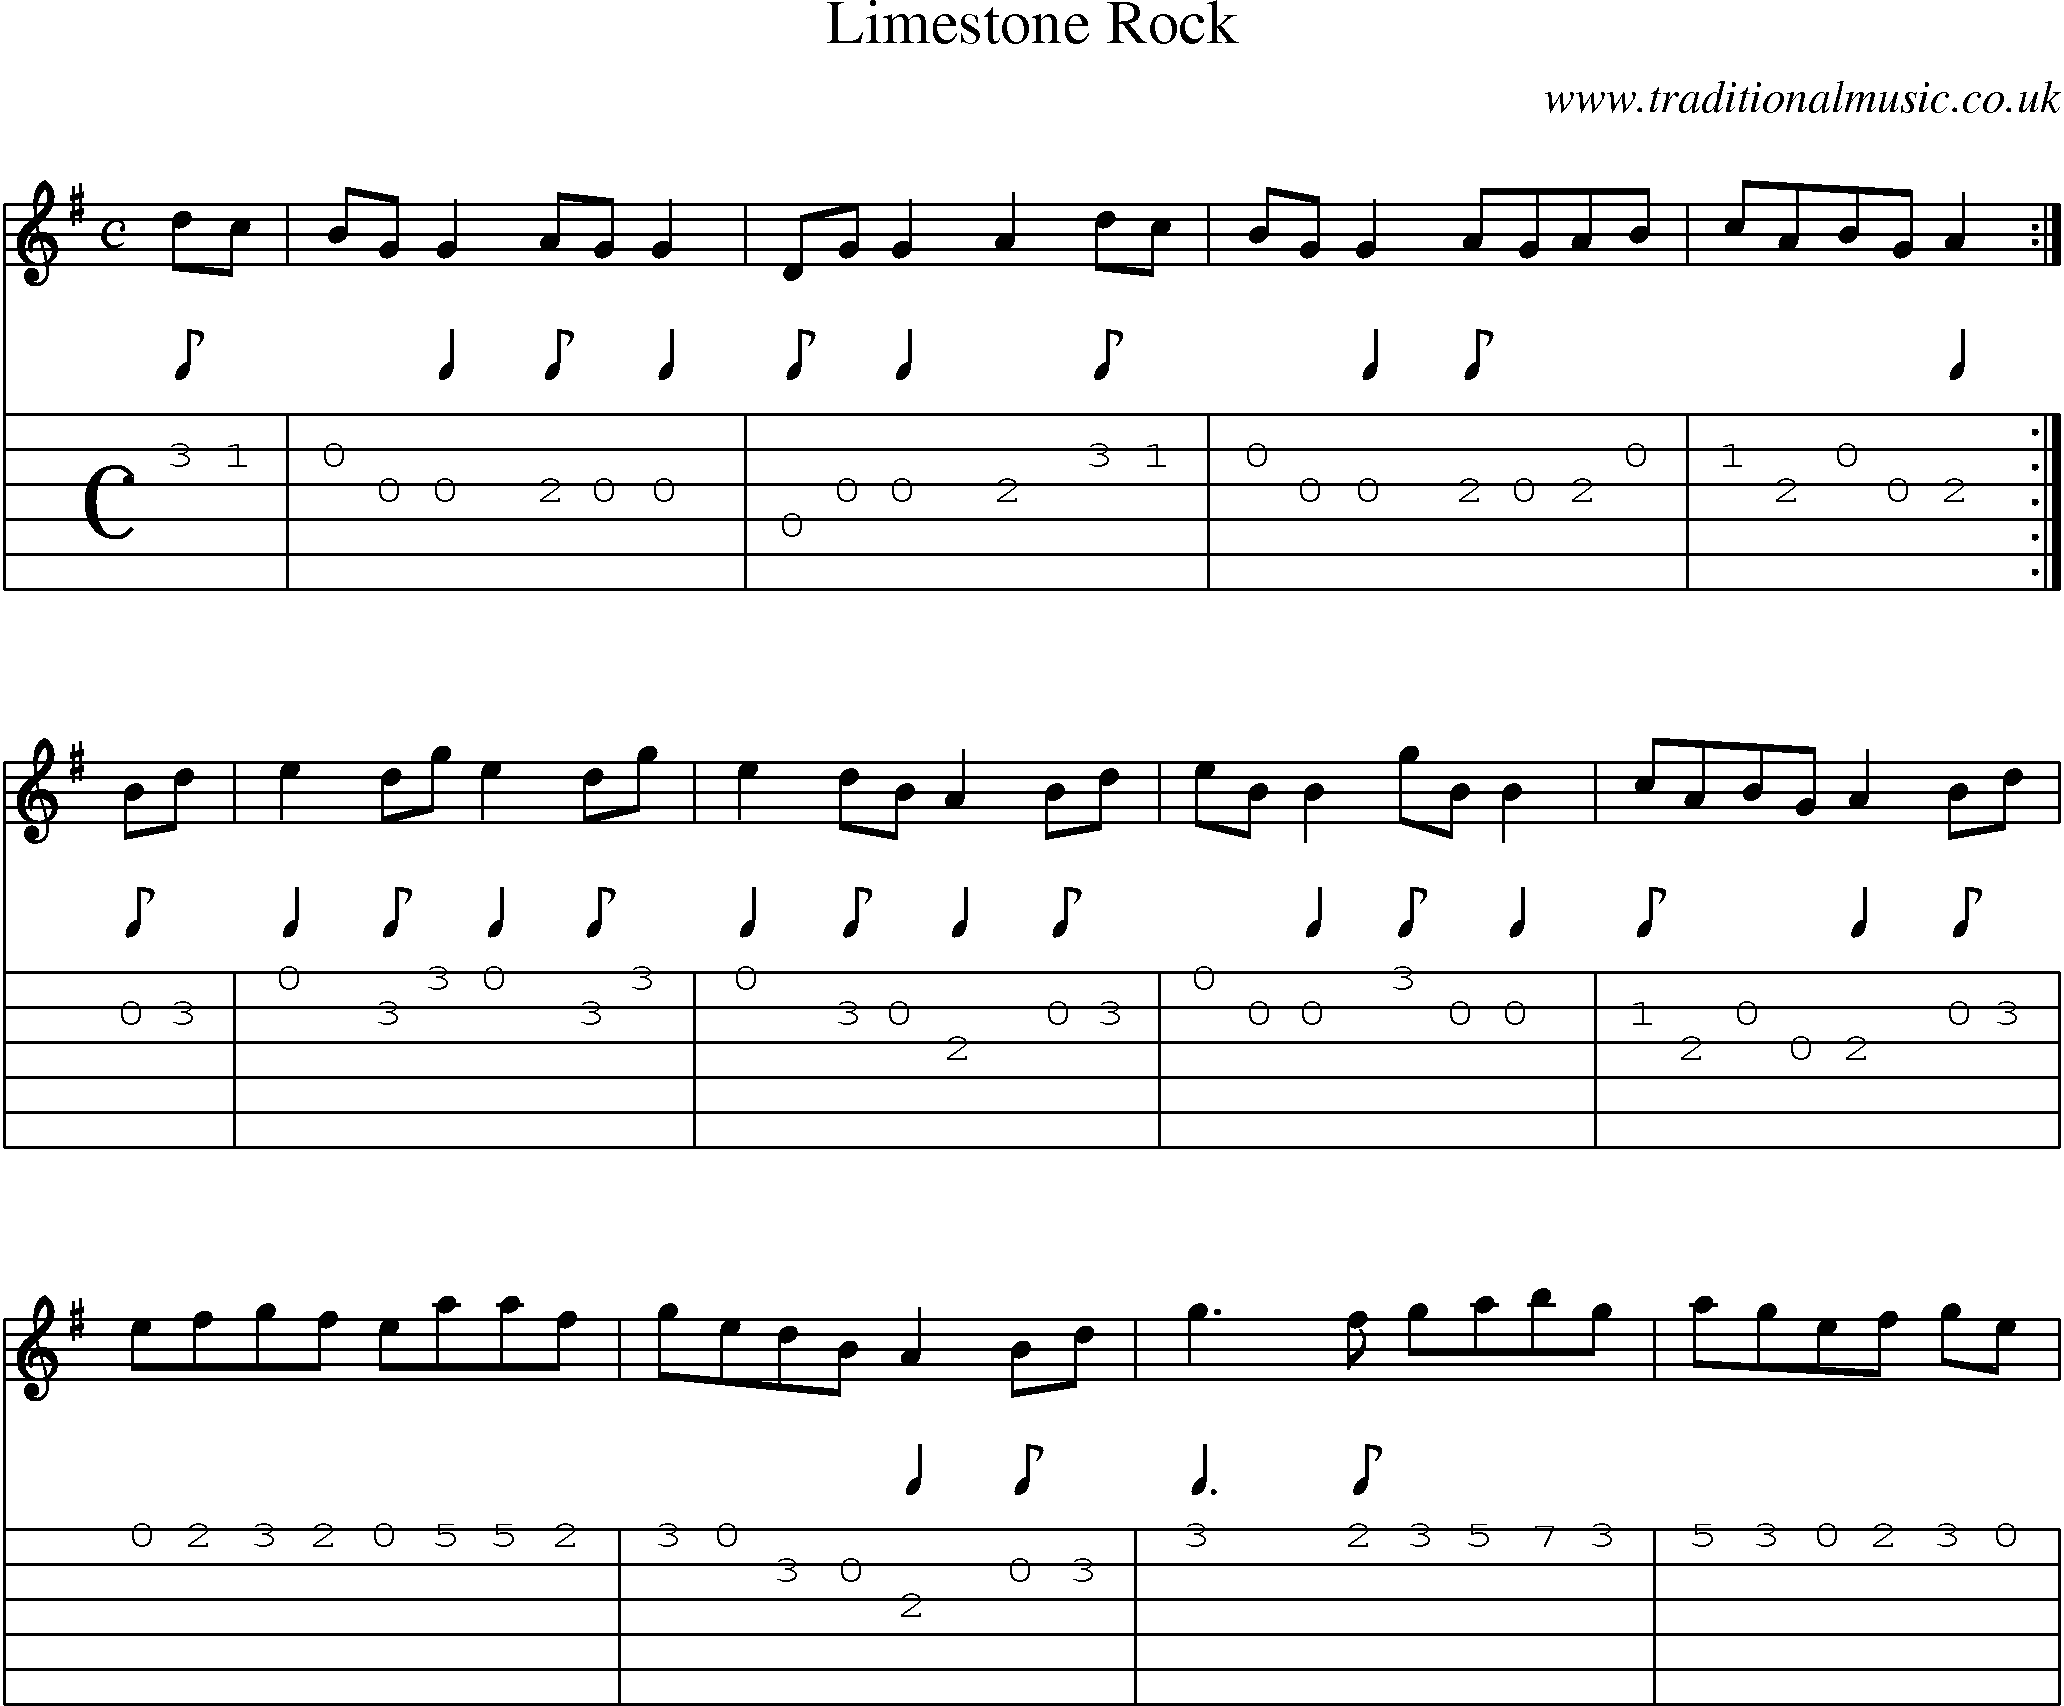 Music Score and Guitar Tabs for Limestone Rock